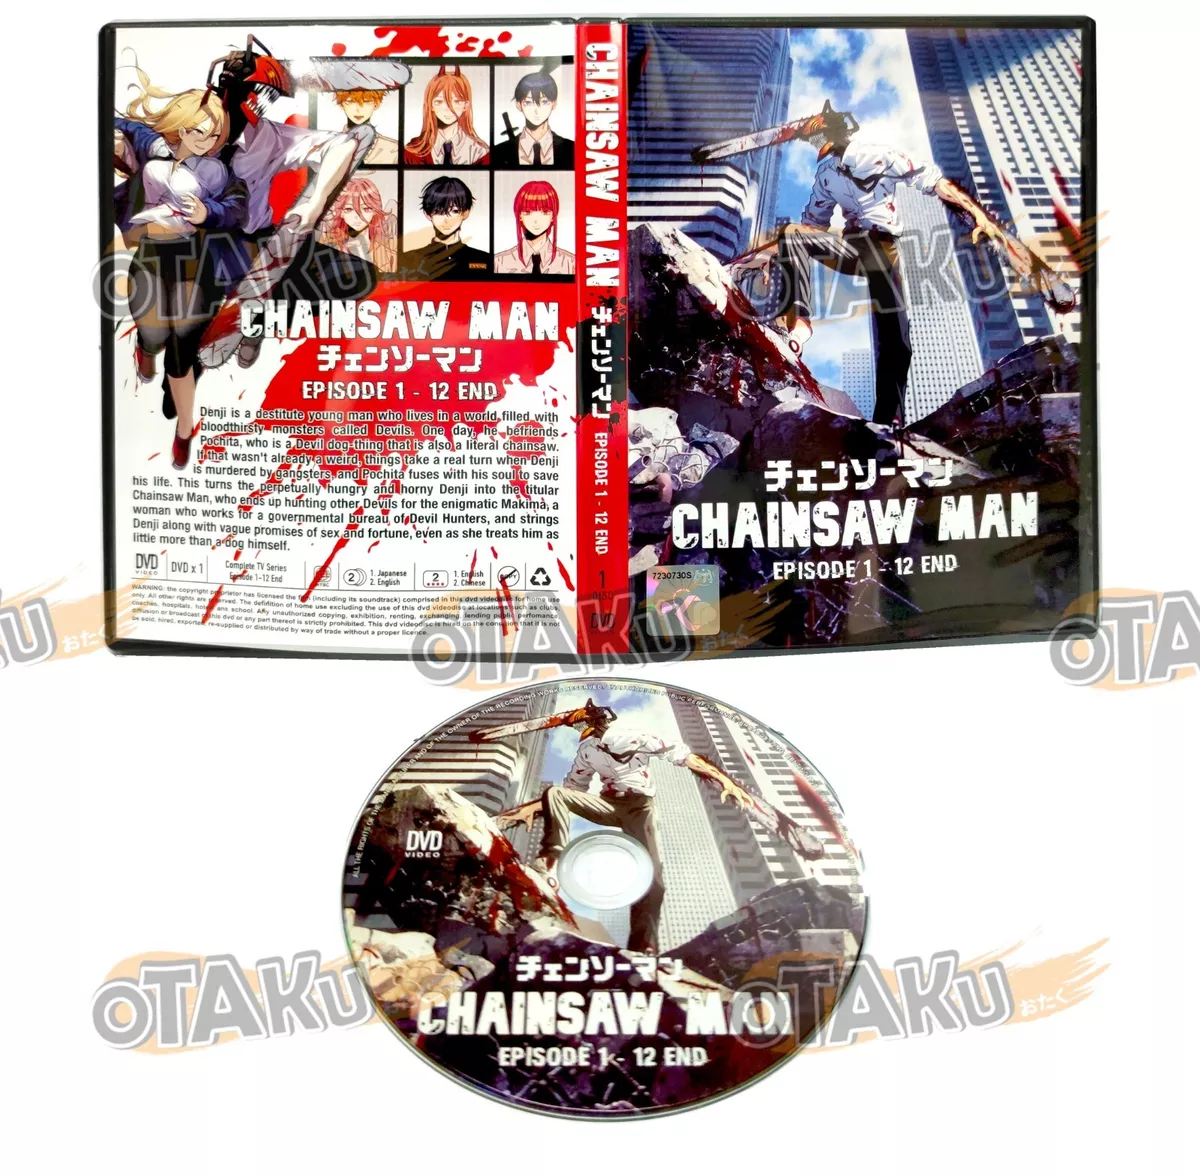 Chainsaw Man Episode 1-12End Japanese Anime DVD English